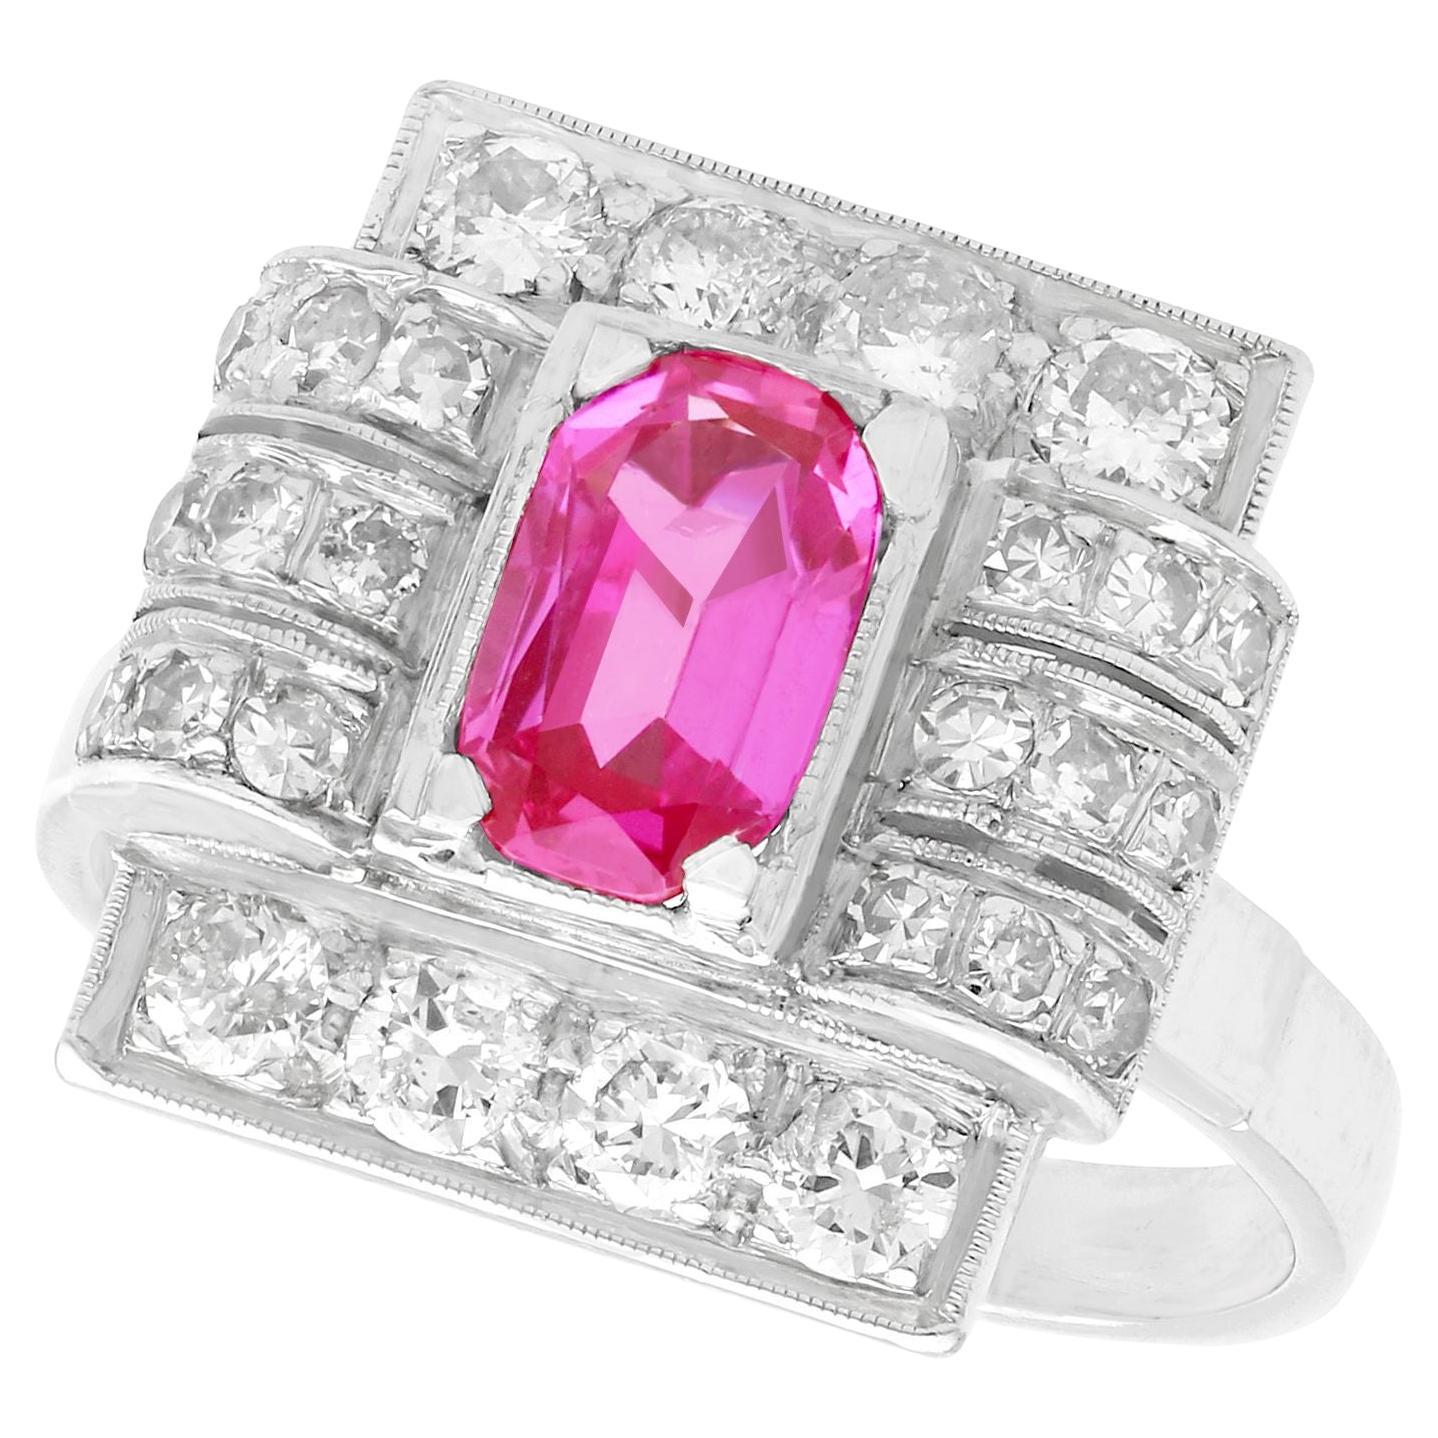 1950s 1.45 Carat Pink Sapphire and Diamond White Gold and Platinum Cocktail Ring